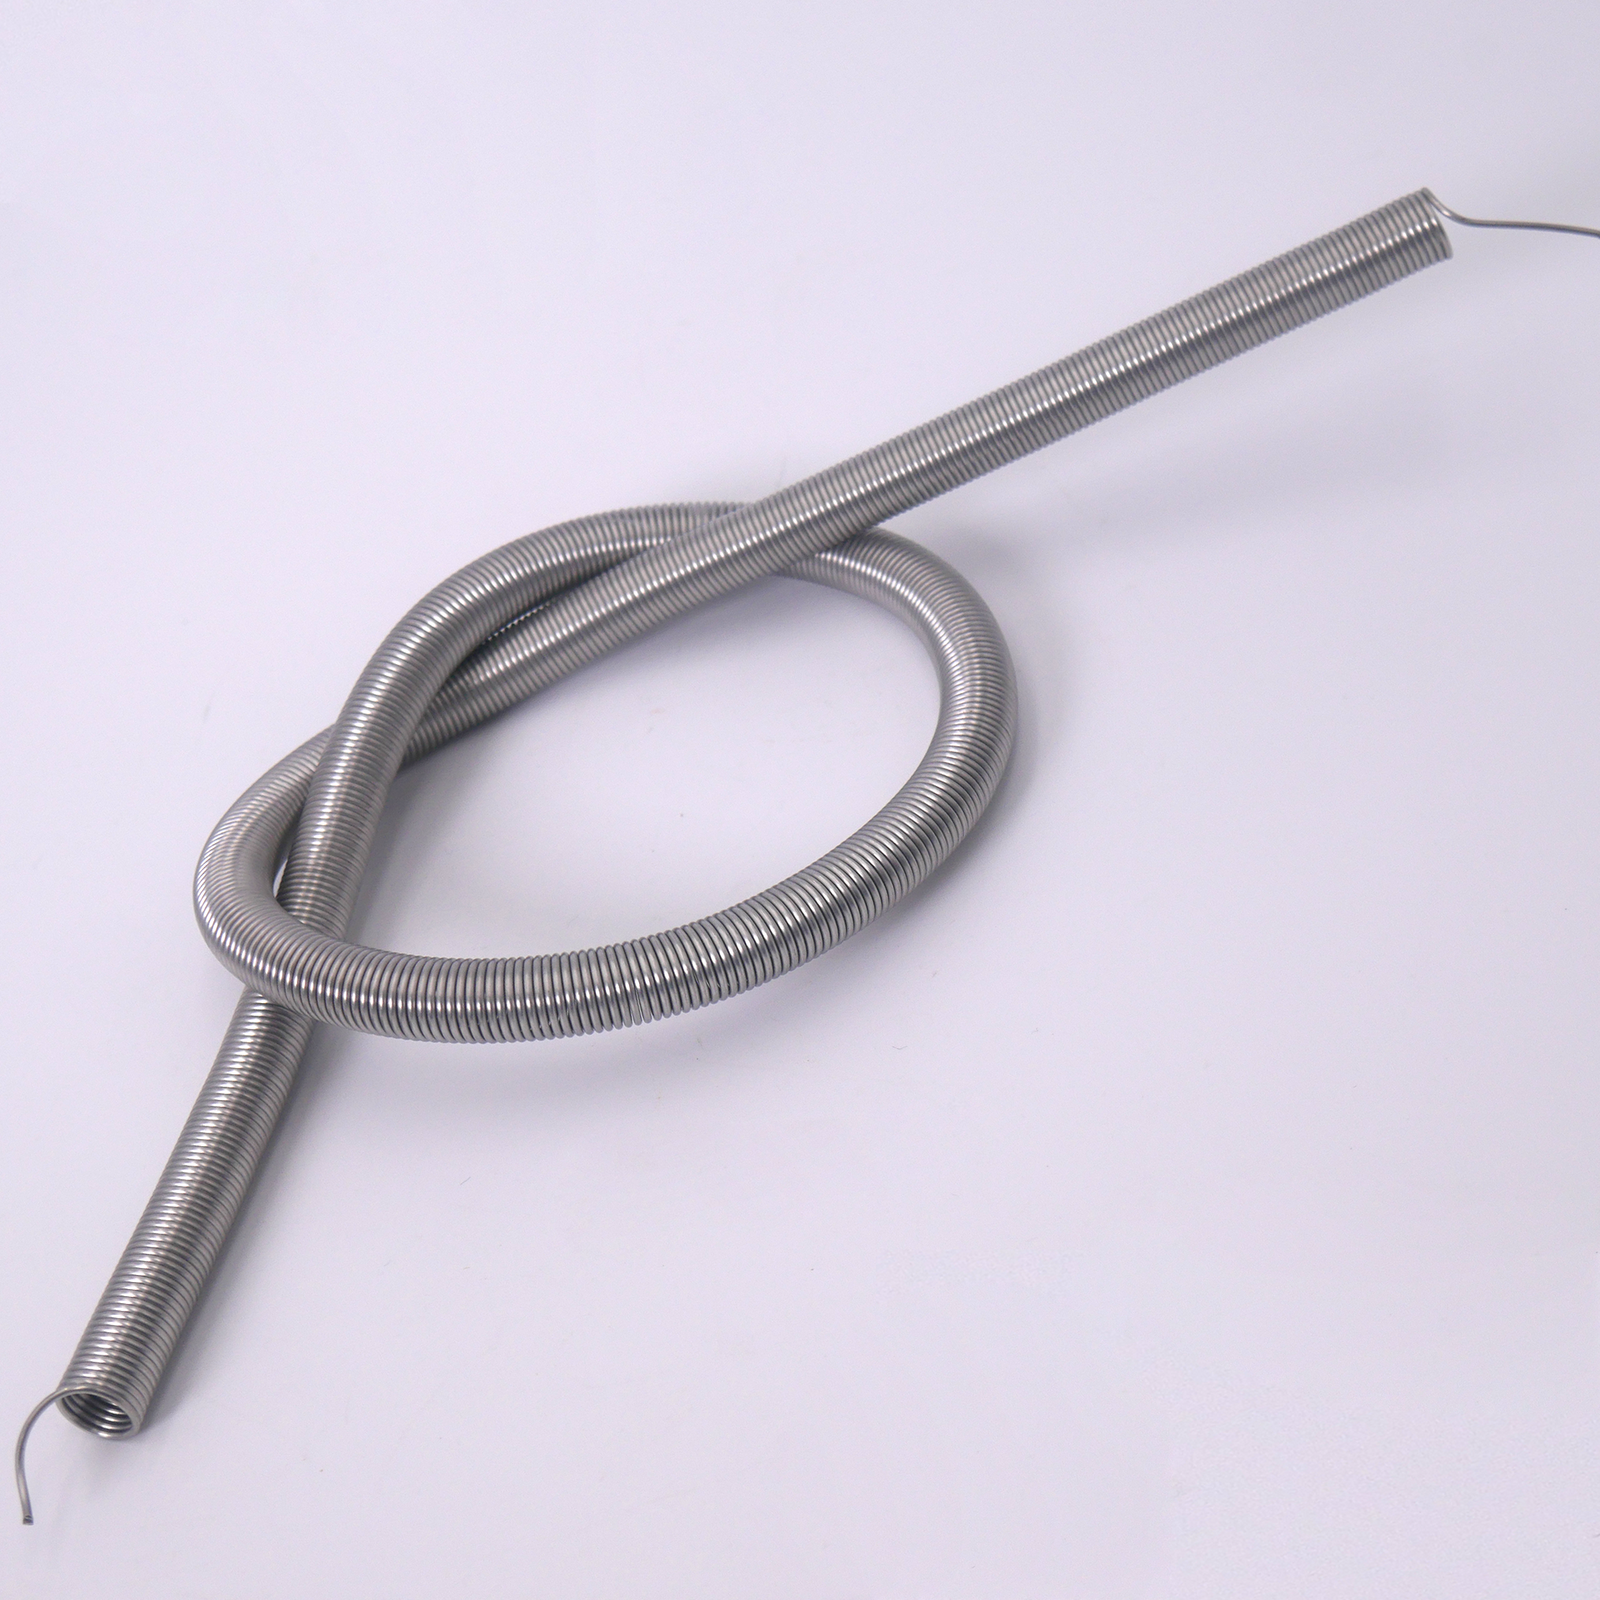 Heating wire spare part for shrink tunnels